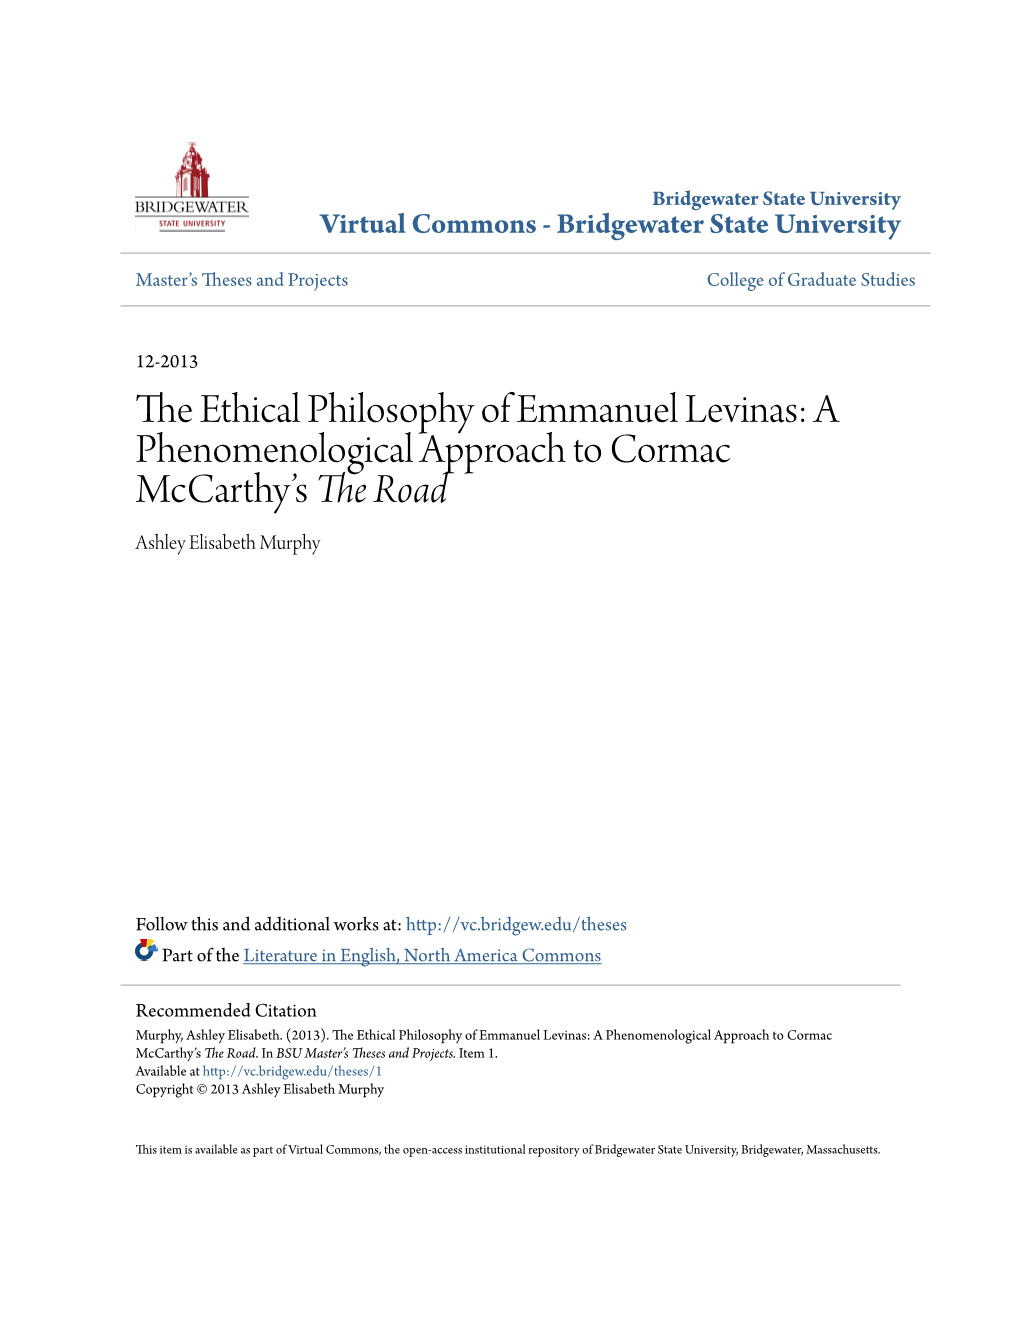 The Ethical Philosophy of Emmanuel Levinas: a Phenomenological Approach To